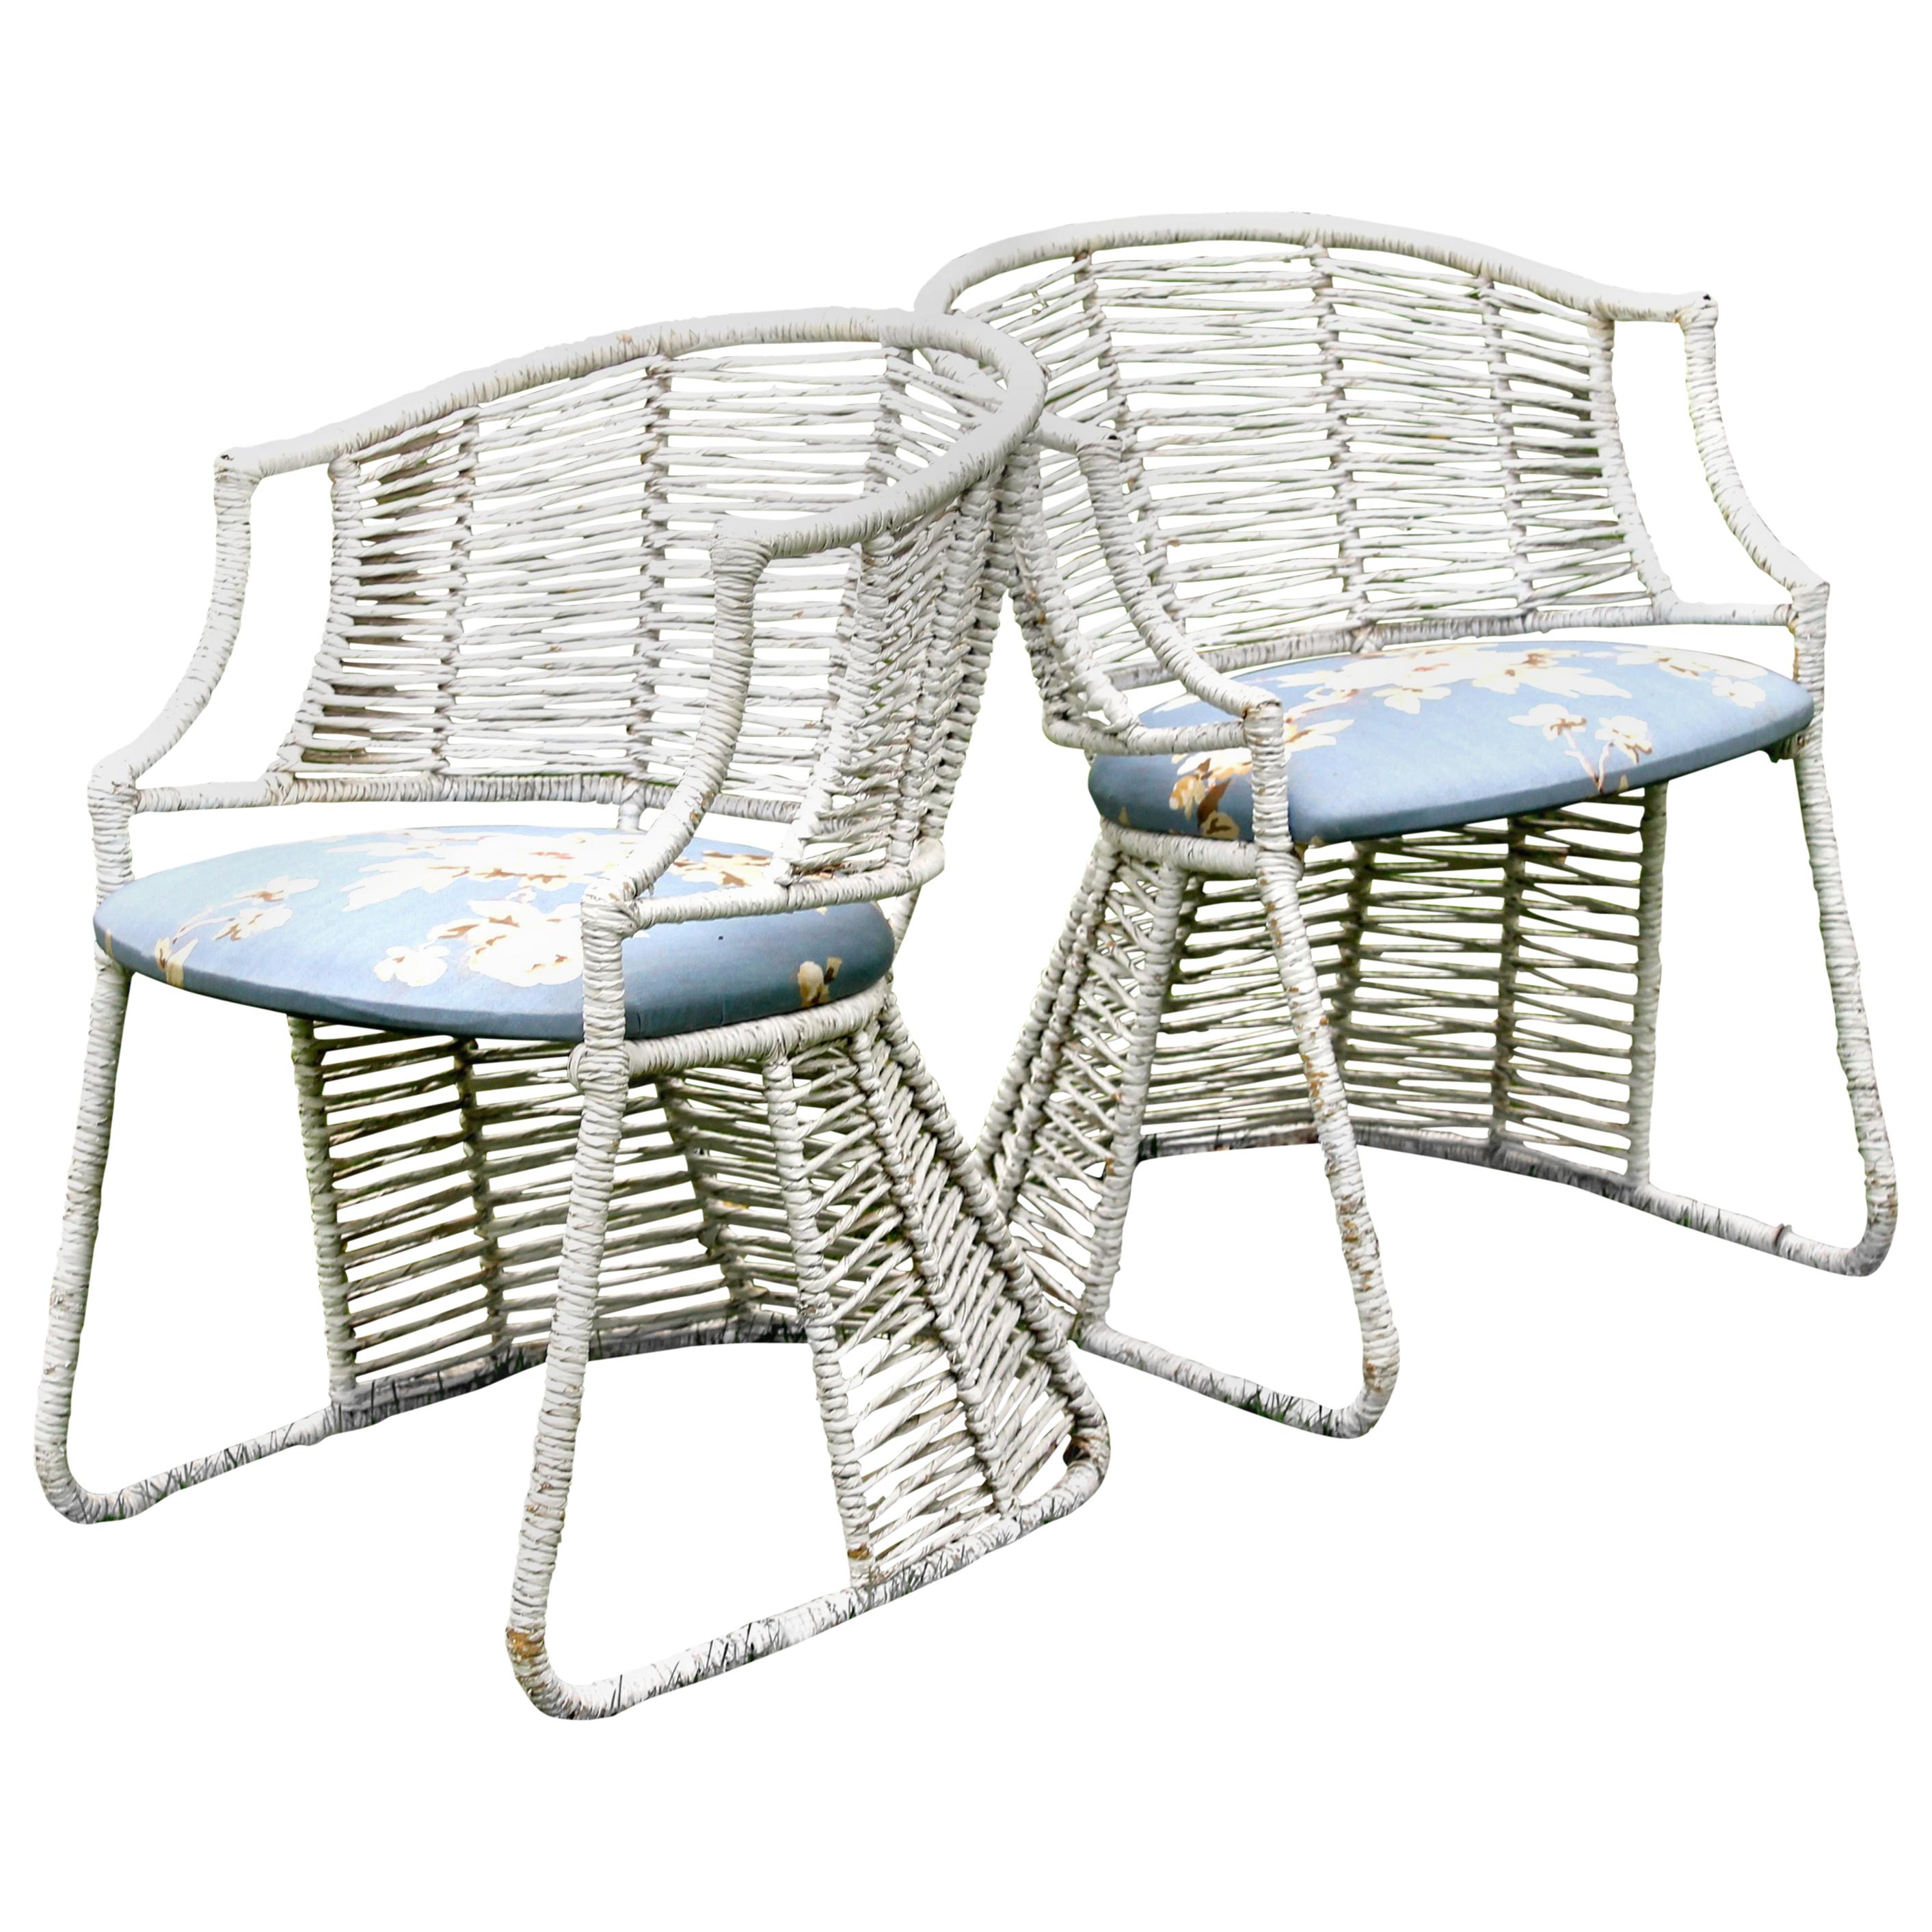 Rare pair of Pierre Chareau Style Porch Chairs